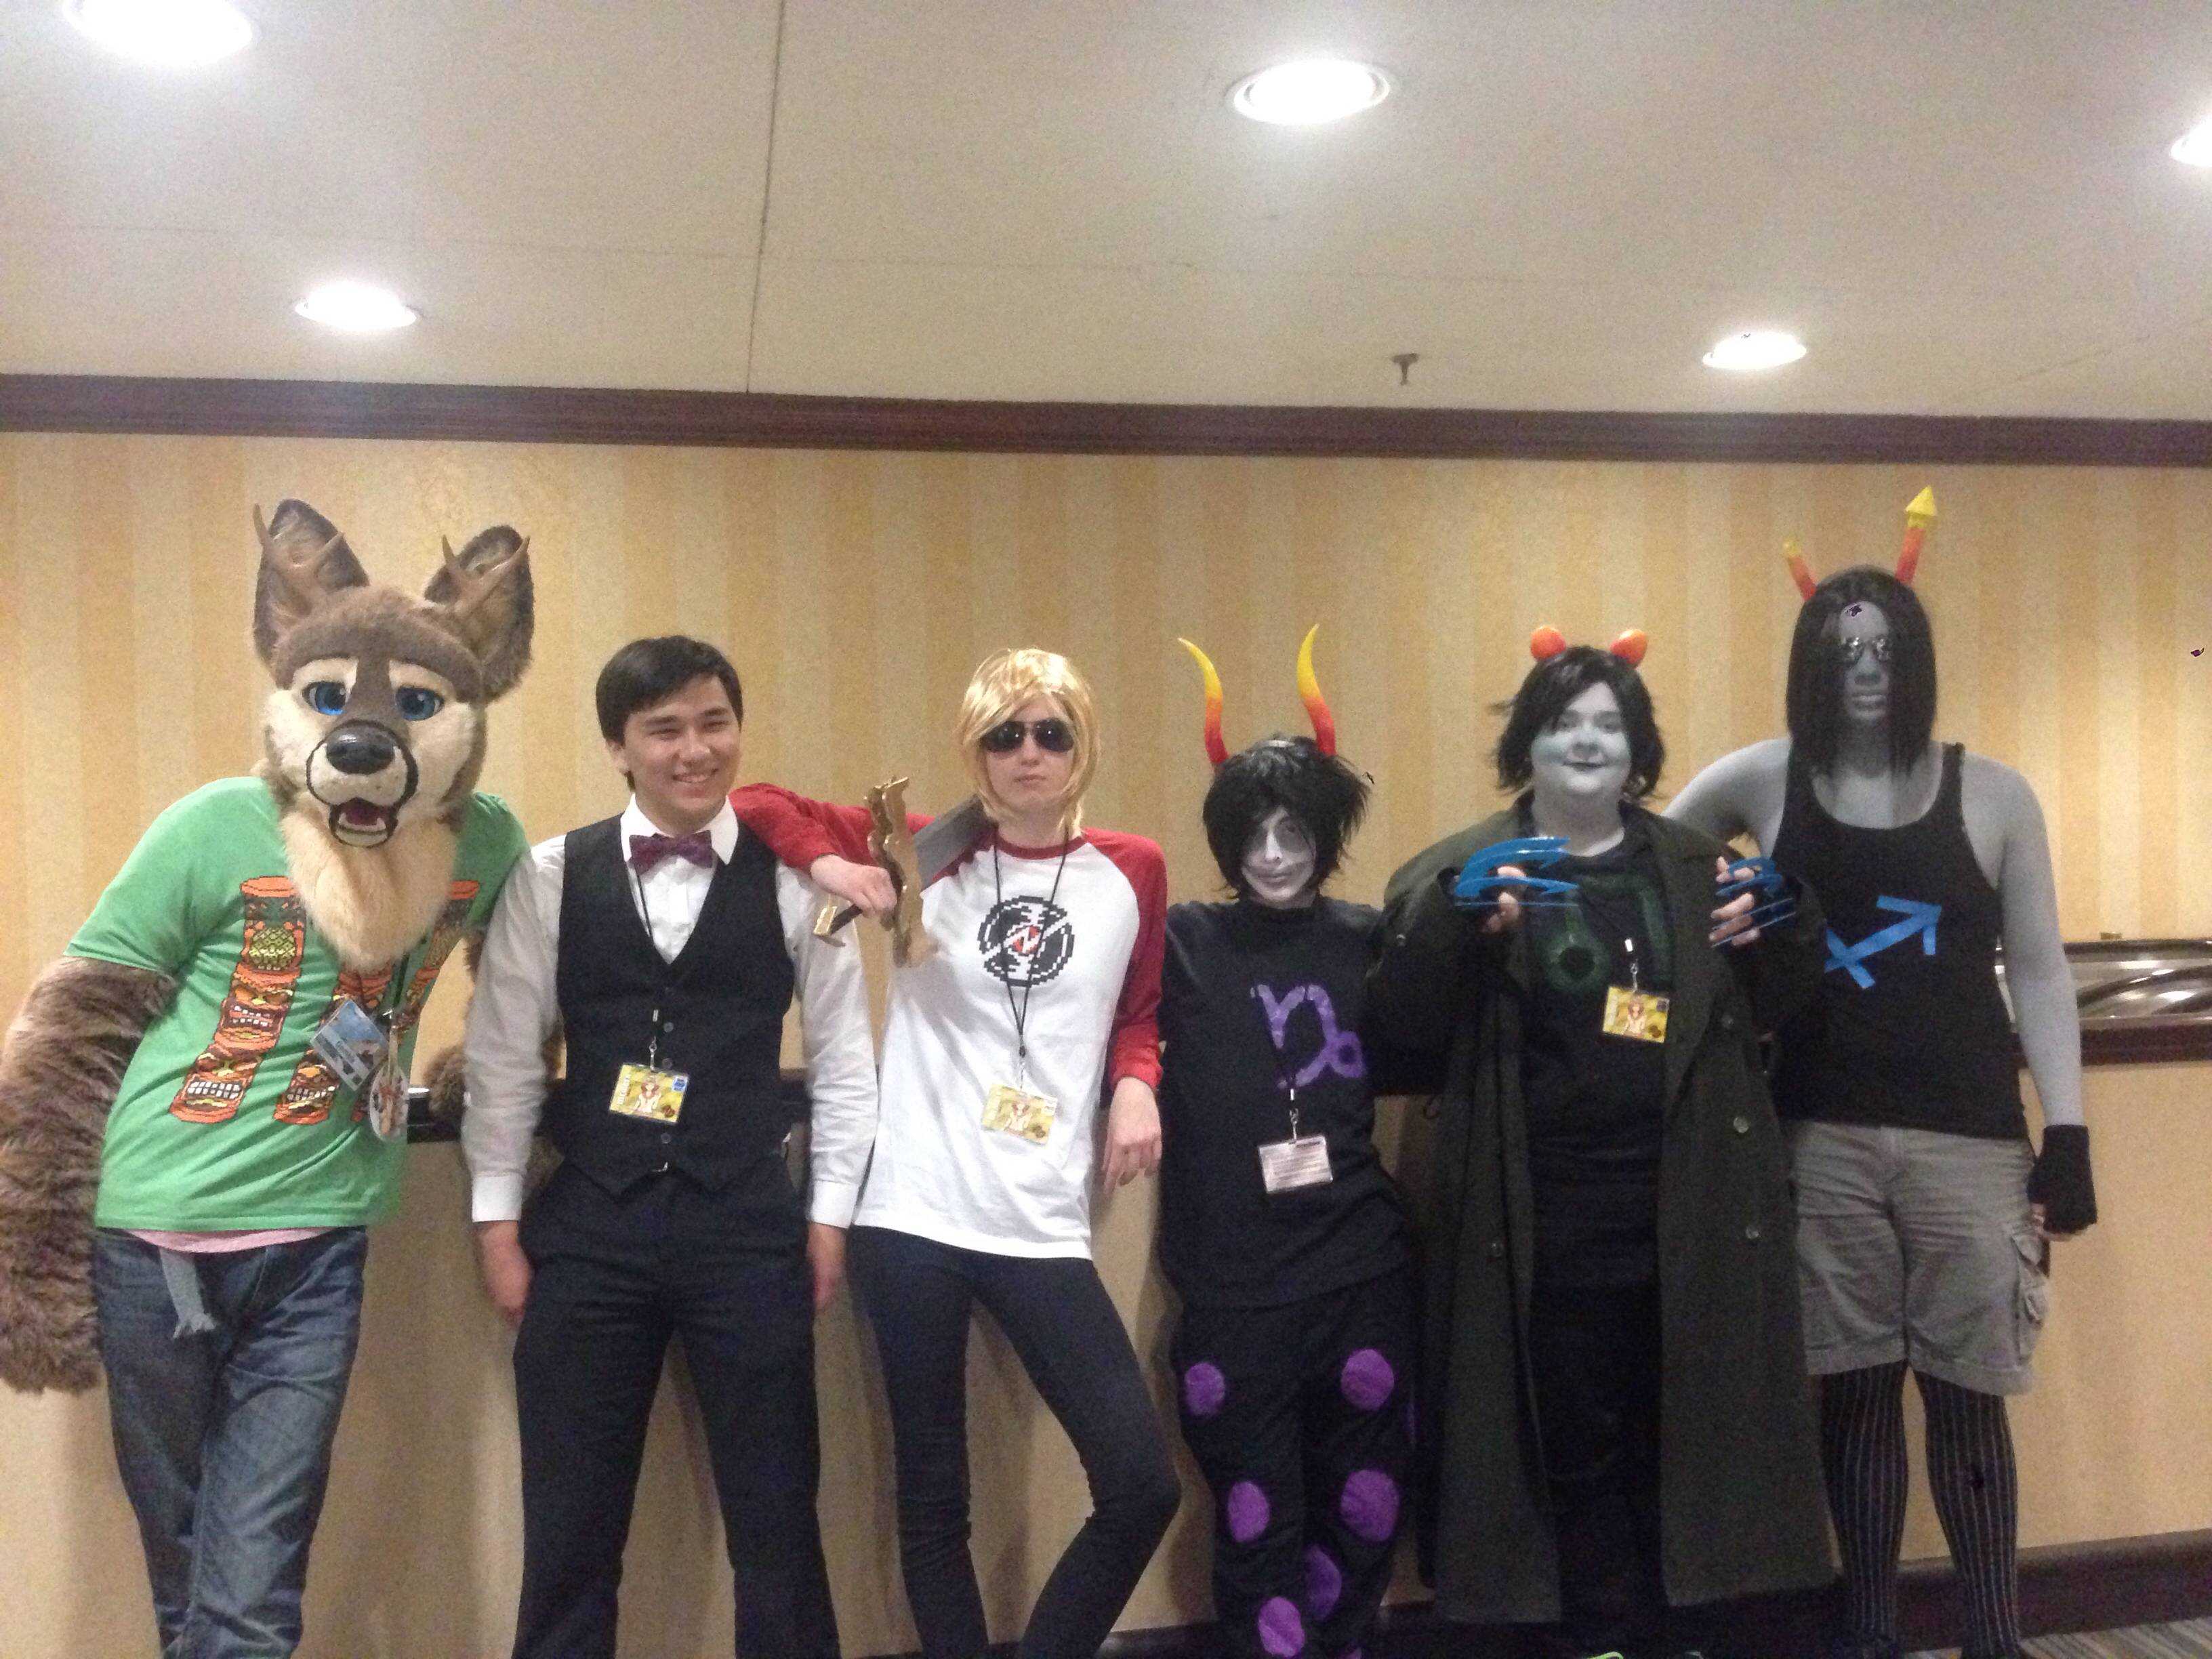 Anime convention of 53K is first US case study for omicron spread CDC says   Ars Technica